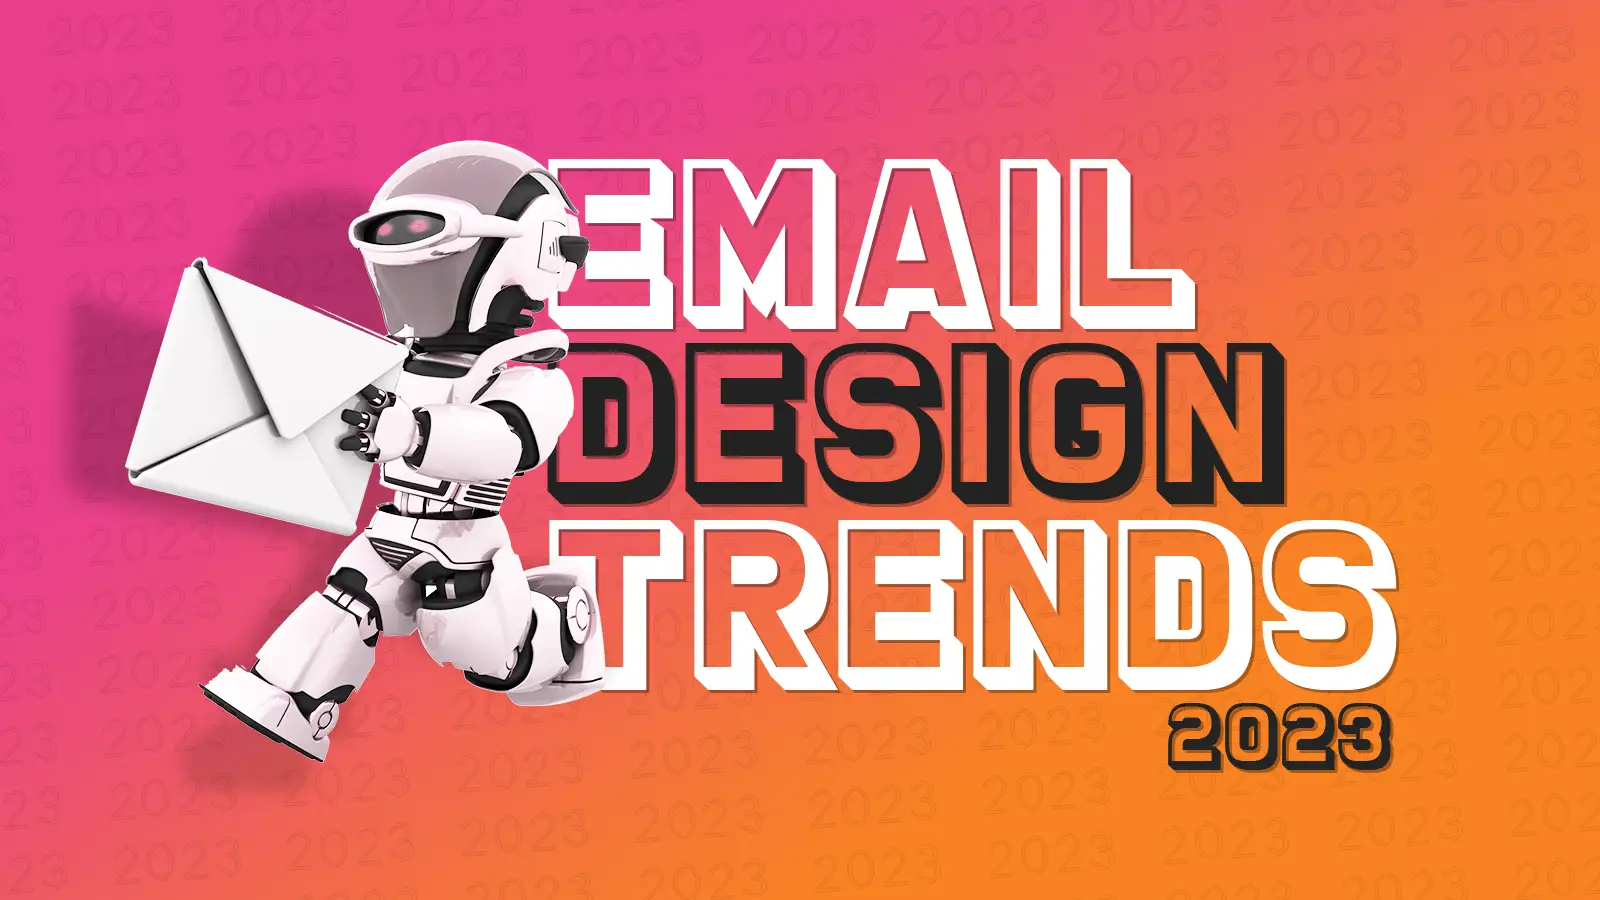 Email design trends 2023